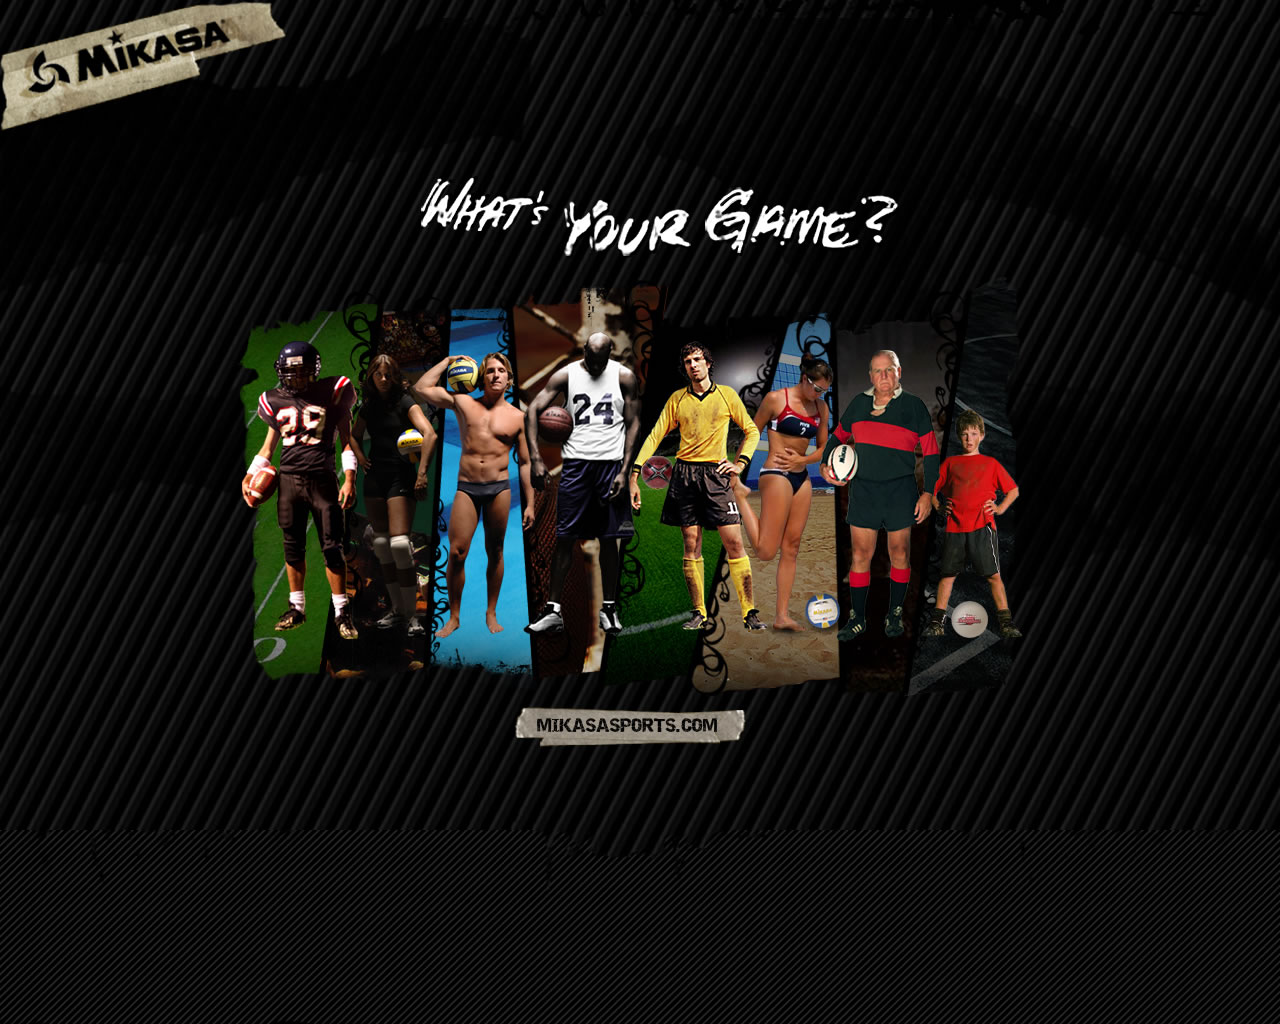 sports wallpaper for walls,team,text,action figure,font,games